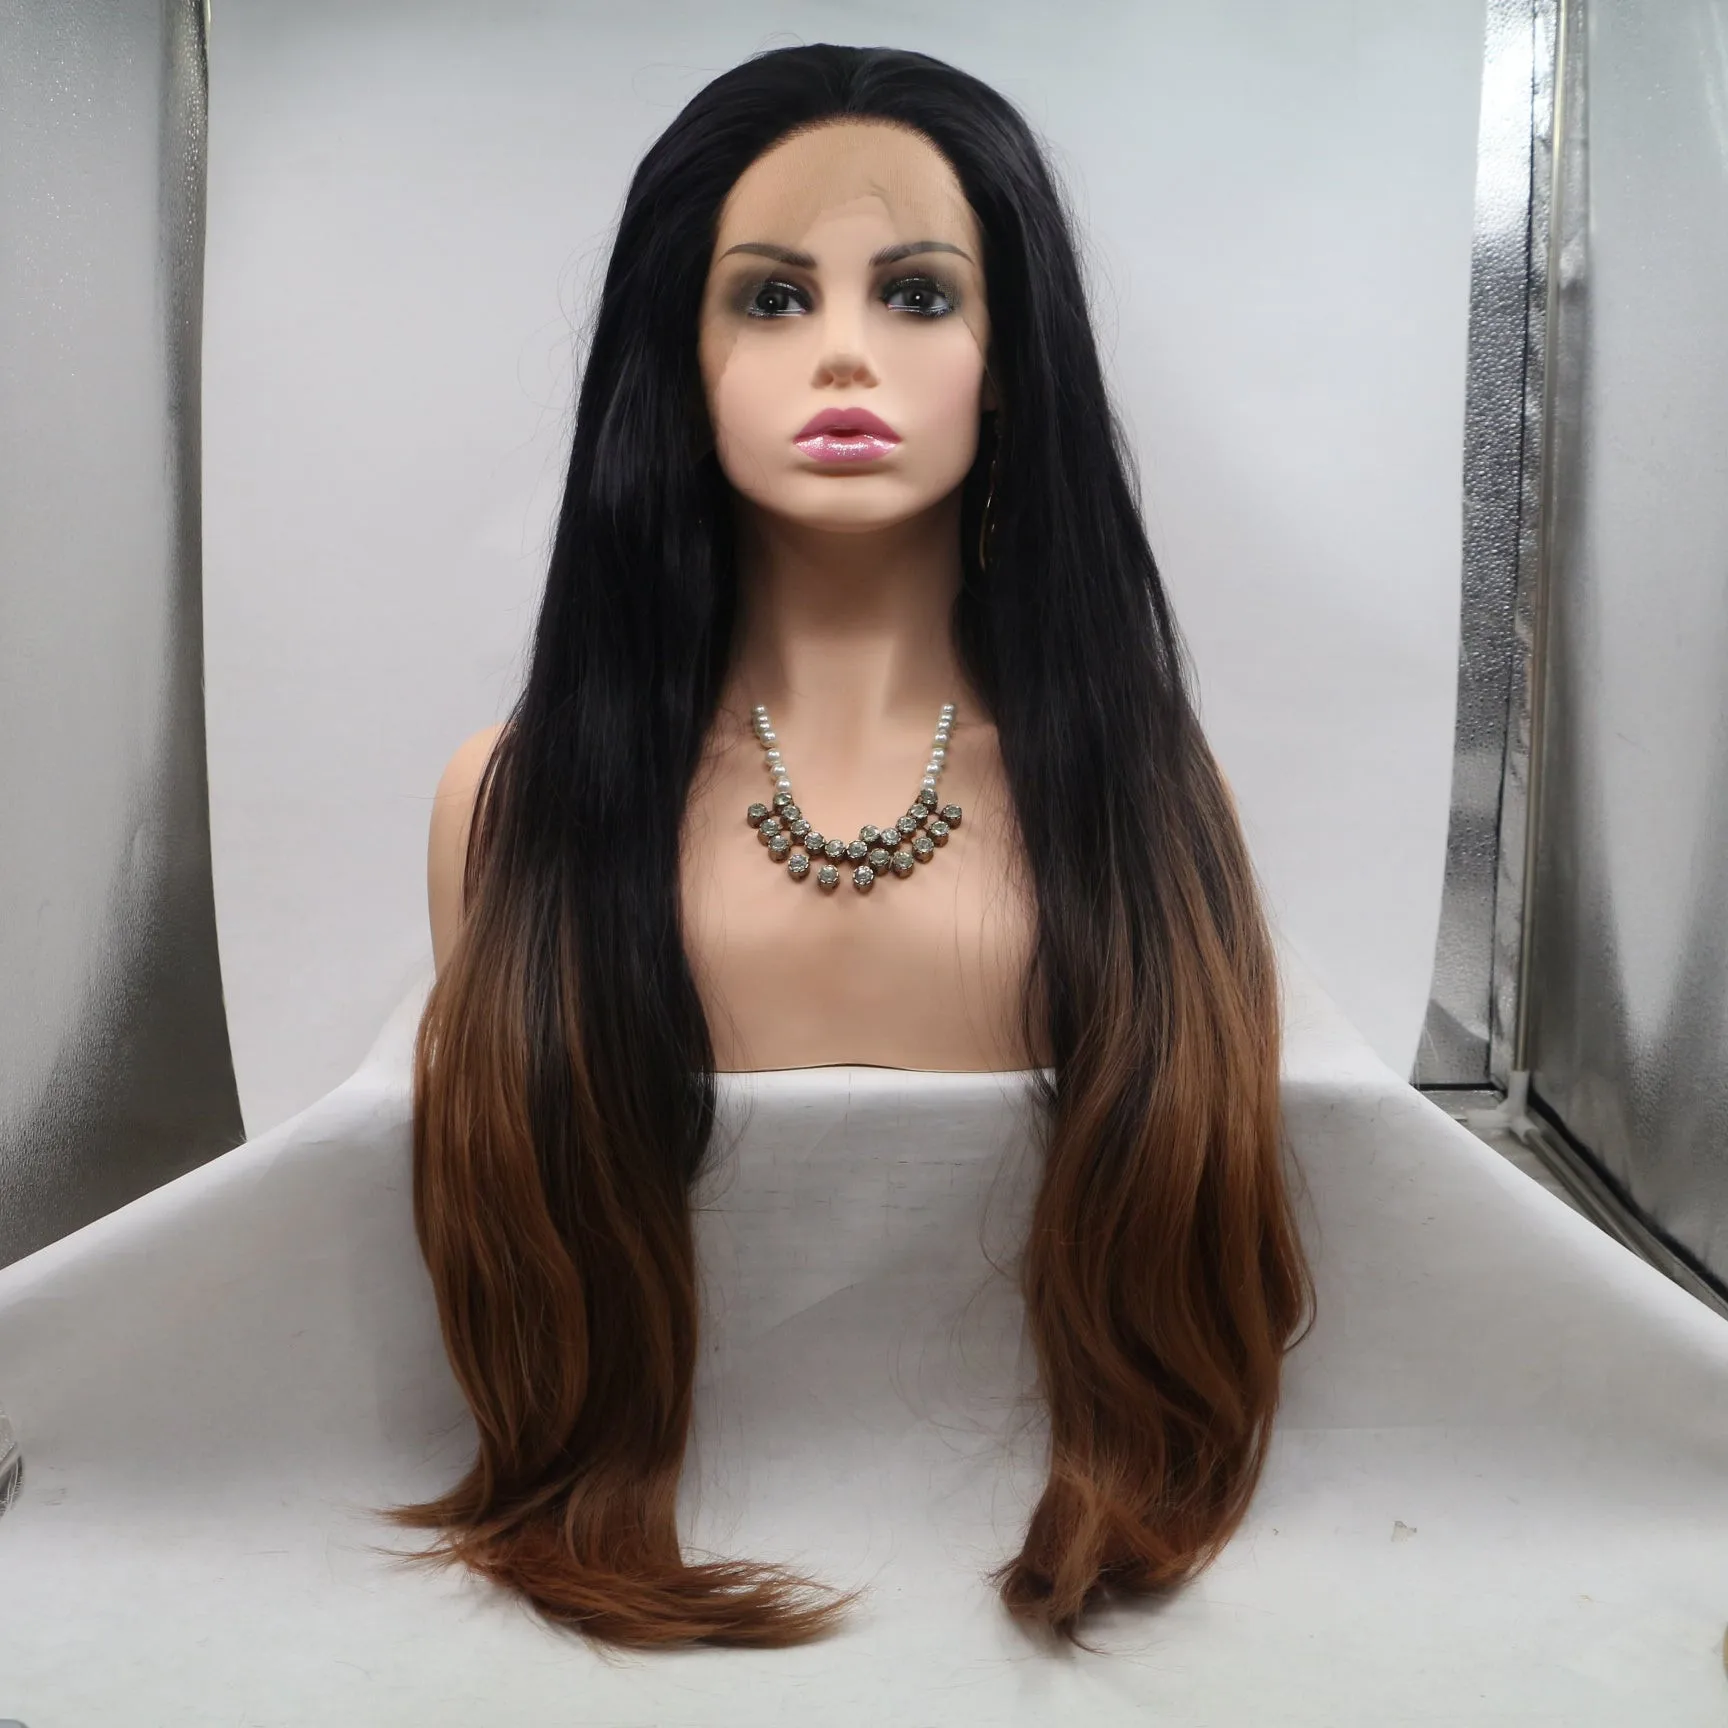 Black Brown Ombre Costume Women Wig Straight Long Lace Front High Heat Resistant Fiber Synthetic Hair Wigs